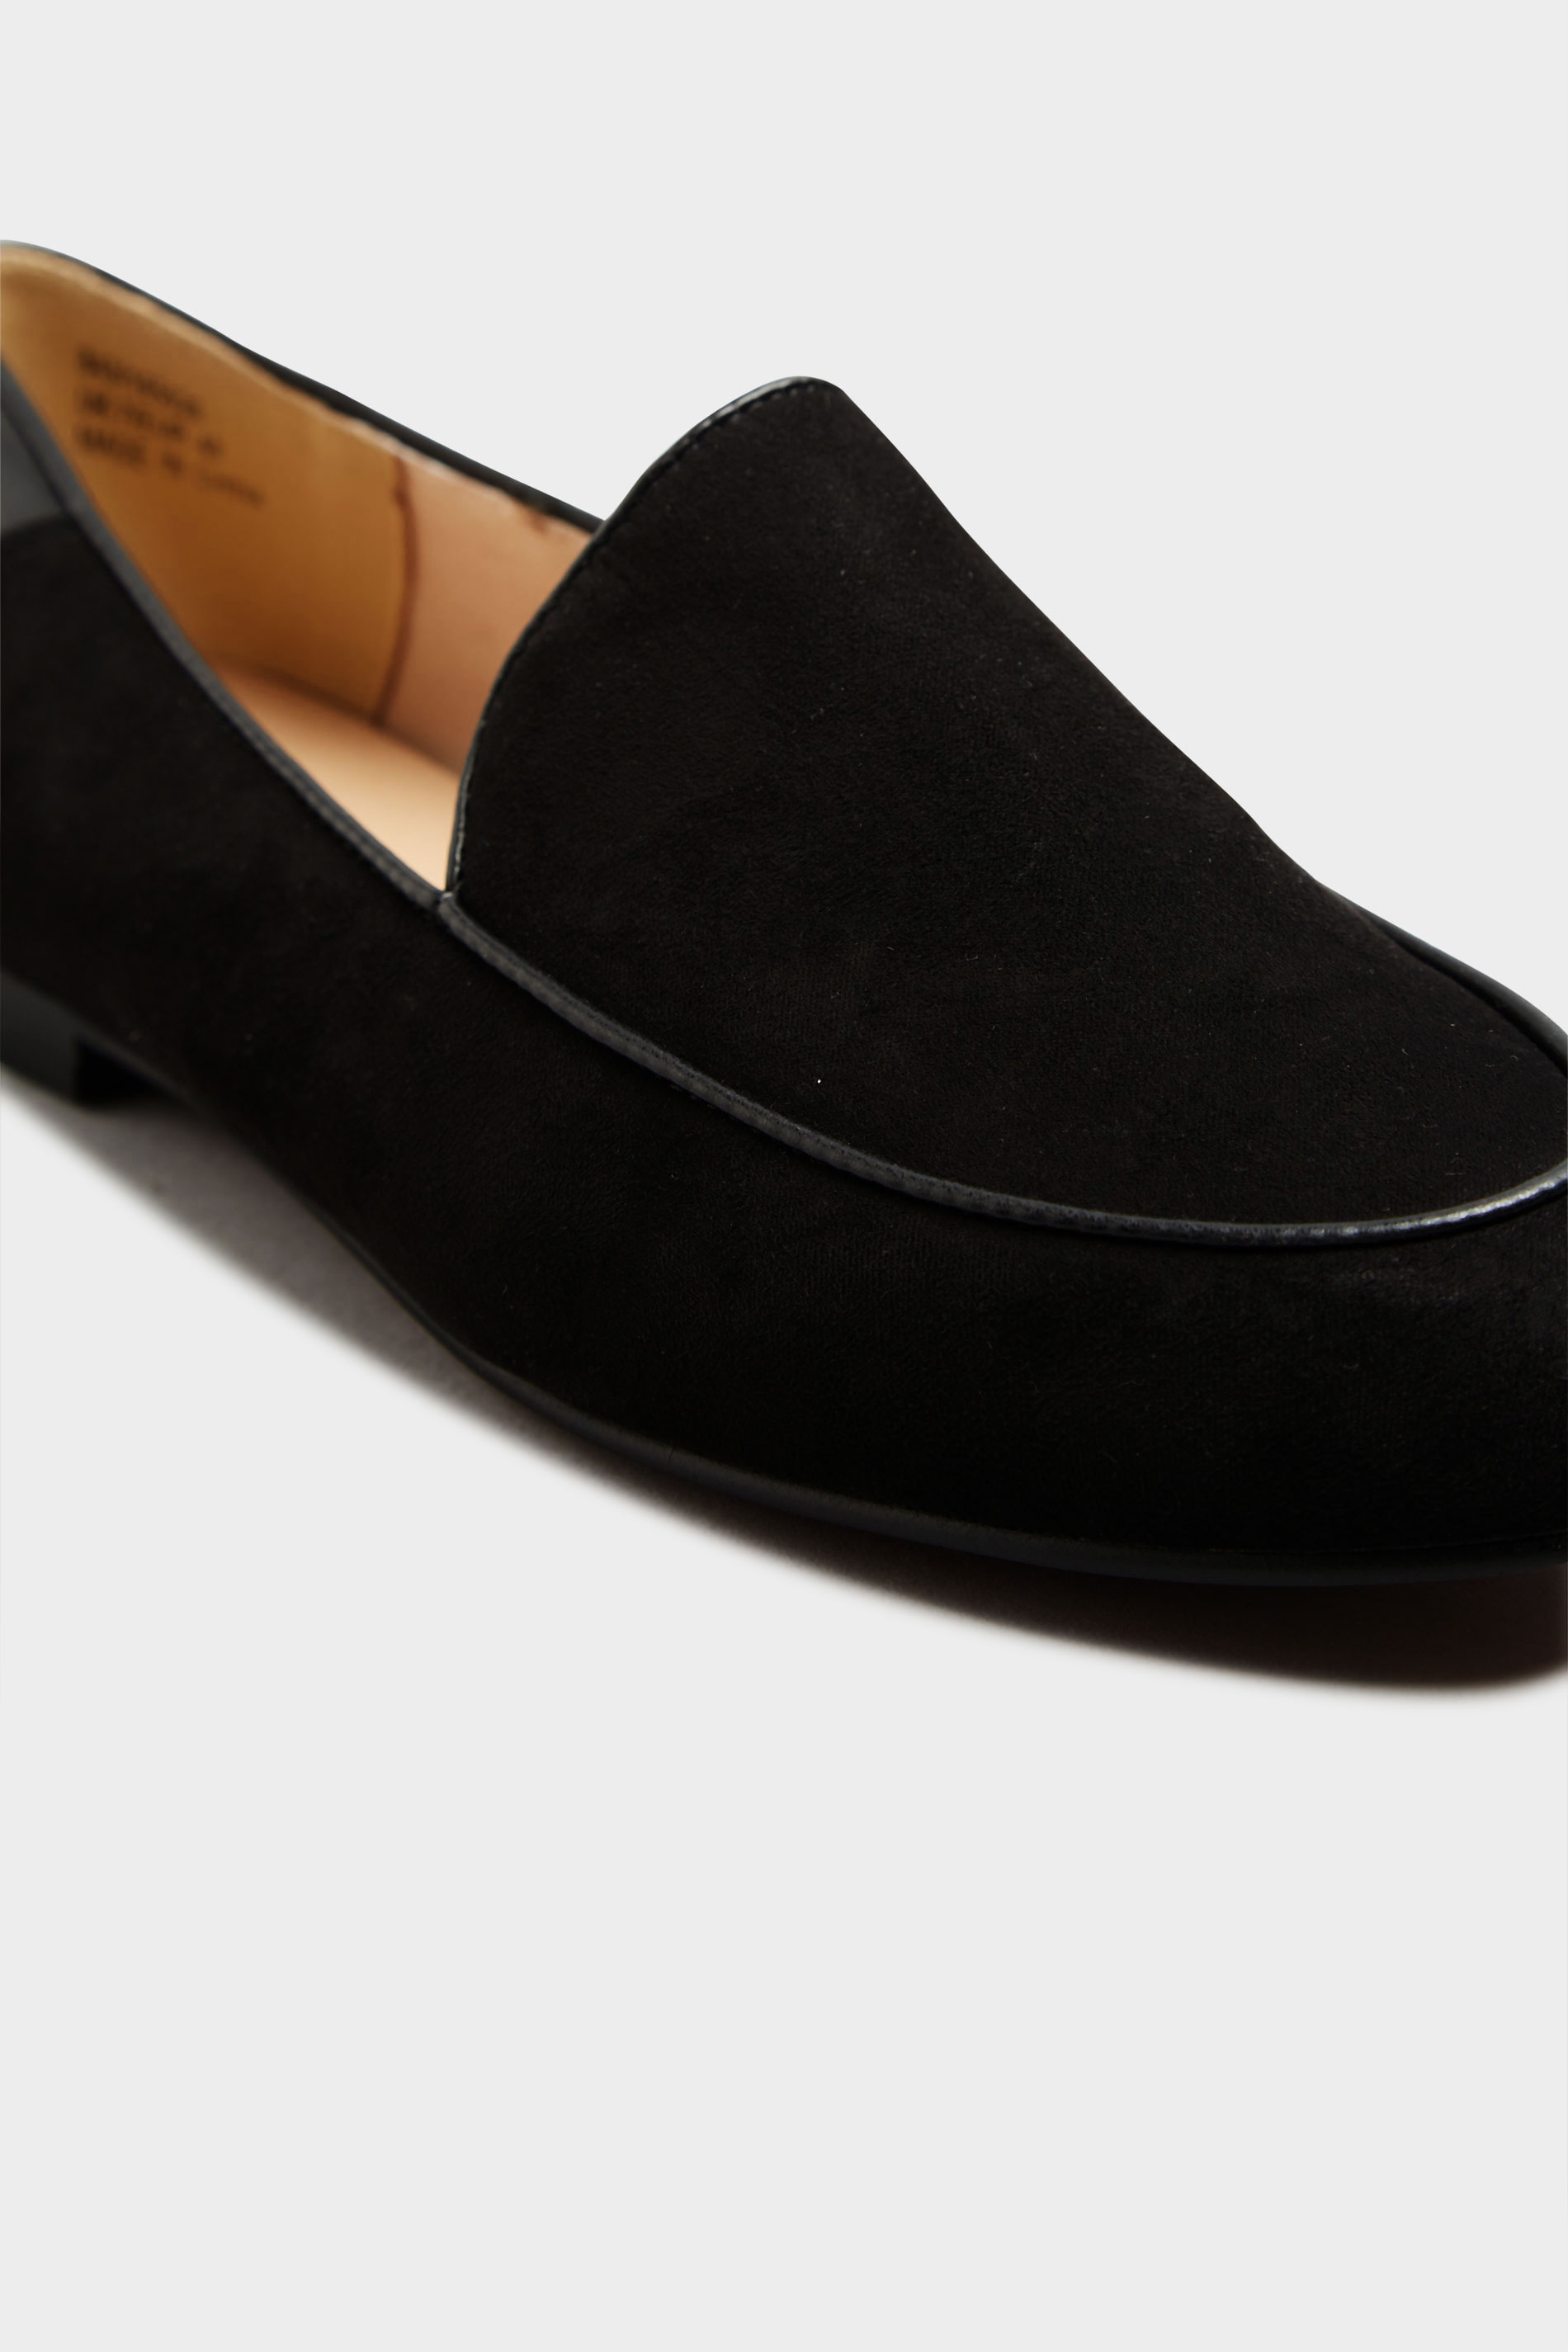 LTS Suede In Standard Fit | Long Tall Sally